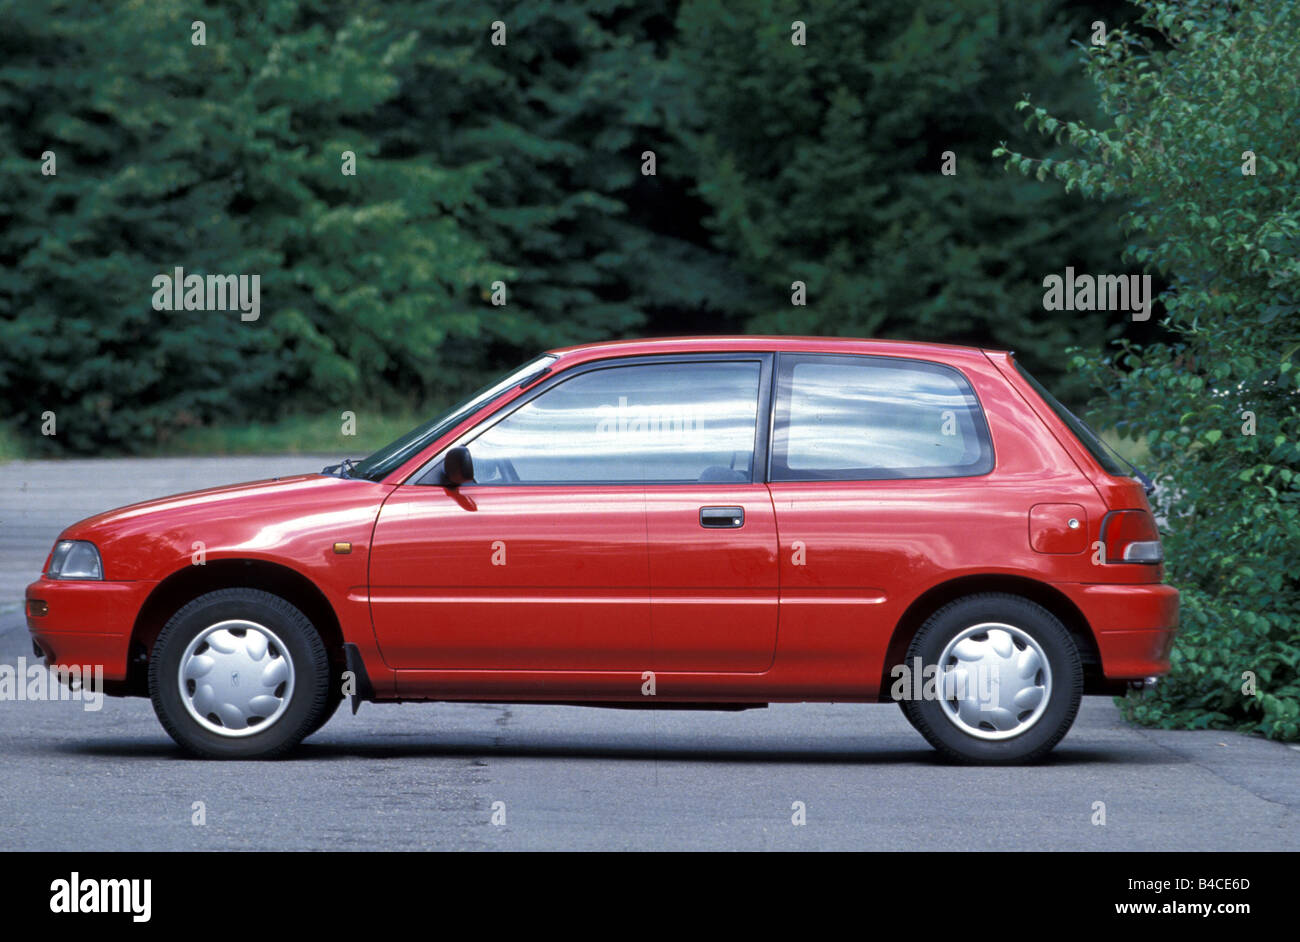 Car, Daihatsu Charade, model year 1993-, red, small approx., Limousine, standing, upholding, side view, country road, photograph Stock Photo